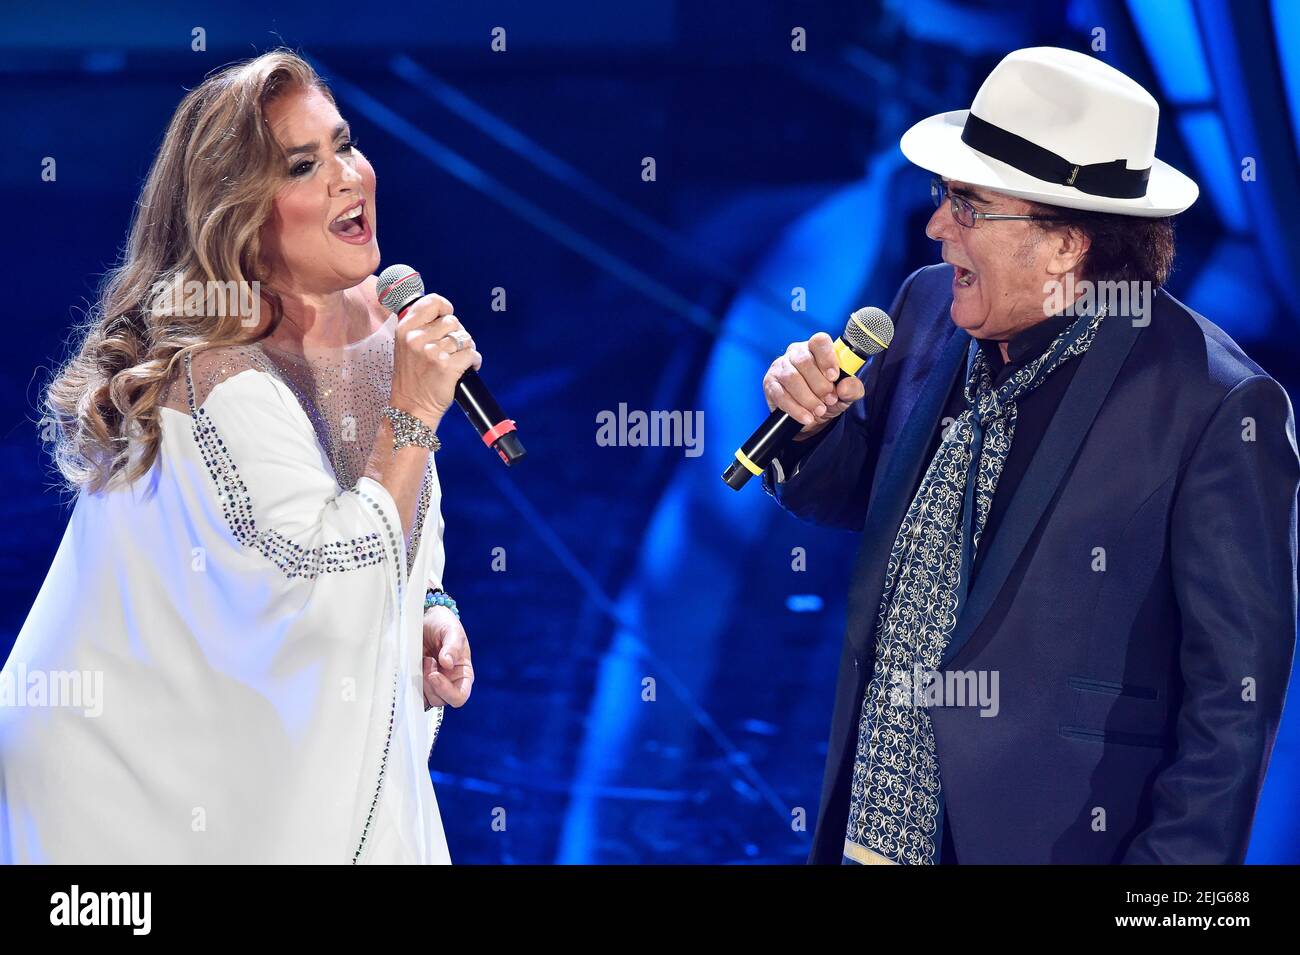 Romina Power, Al Bano at the first evening of the 70th Sanremo Music  Festival. Sanremo (Italy), February 4th, 2020Romina Power, Al Bano (Albano  Carrisi) at the first evening of the 70th Sanremo